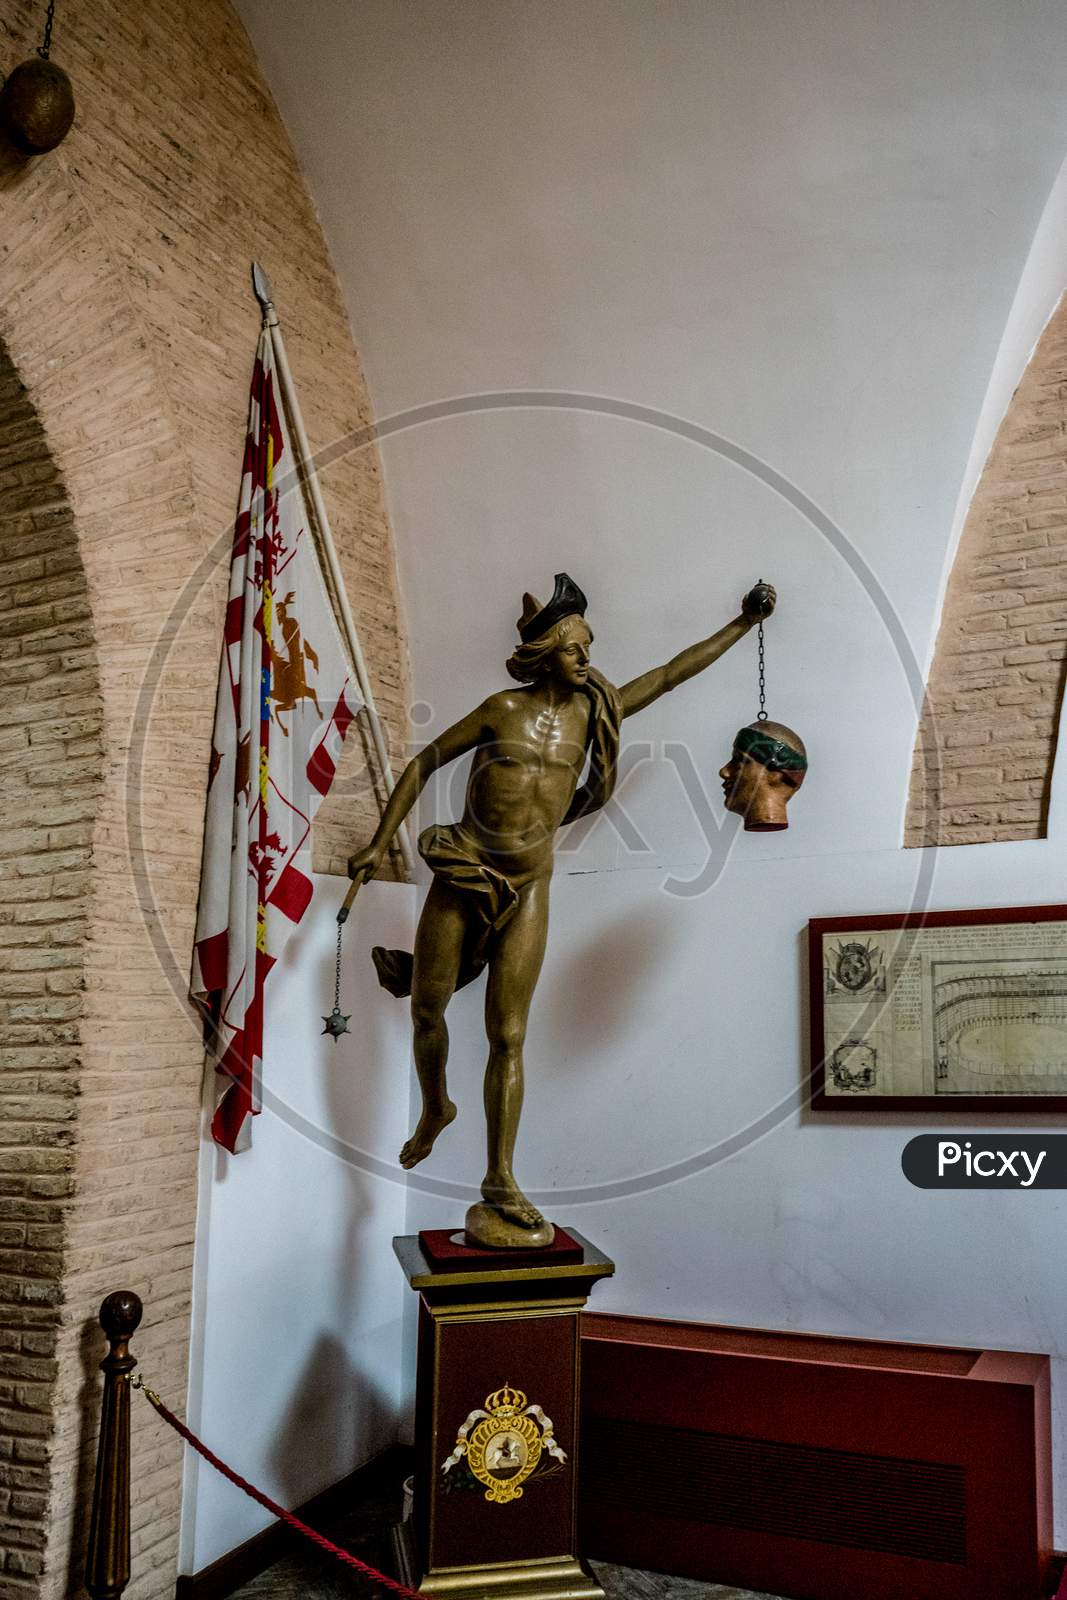 Seville, Spain- June 18, 2017:  A Statue Of An Person Holding A Head And A Mace Is Placed Inside The Bull Fighting Ring In Seville, Spain June 2017, Europe